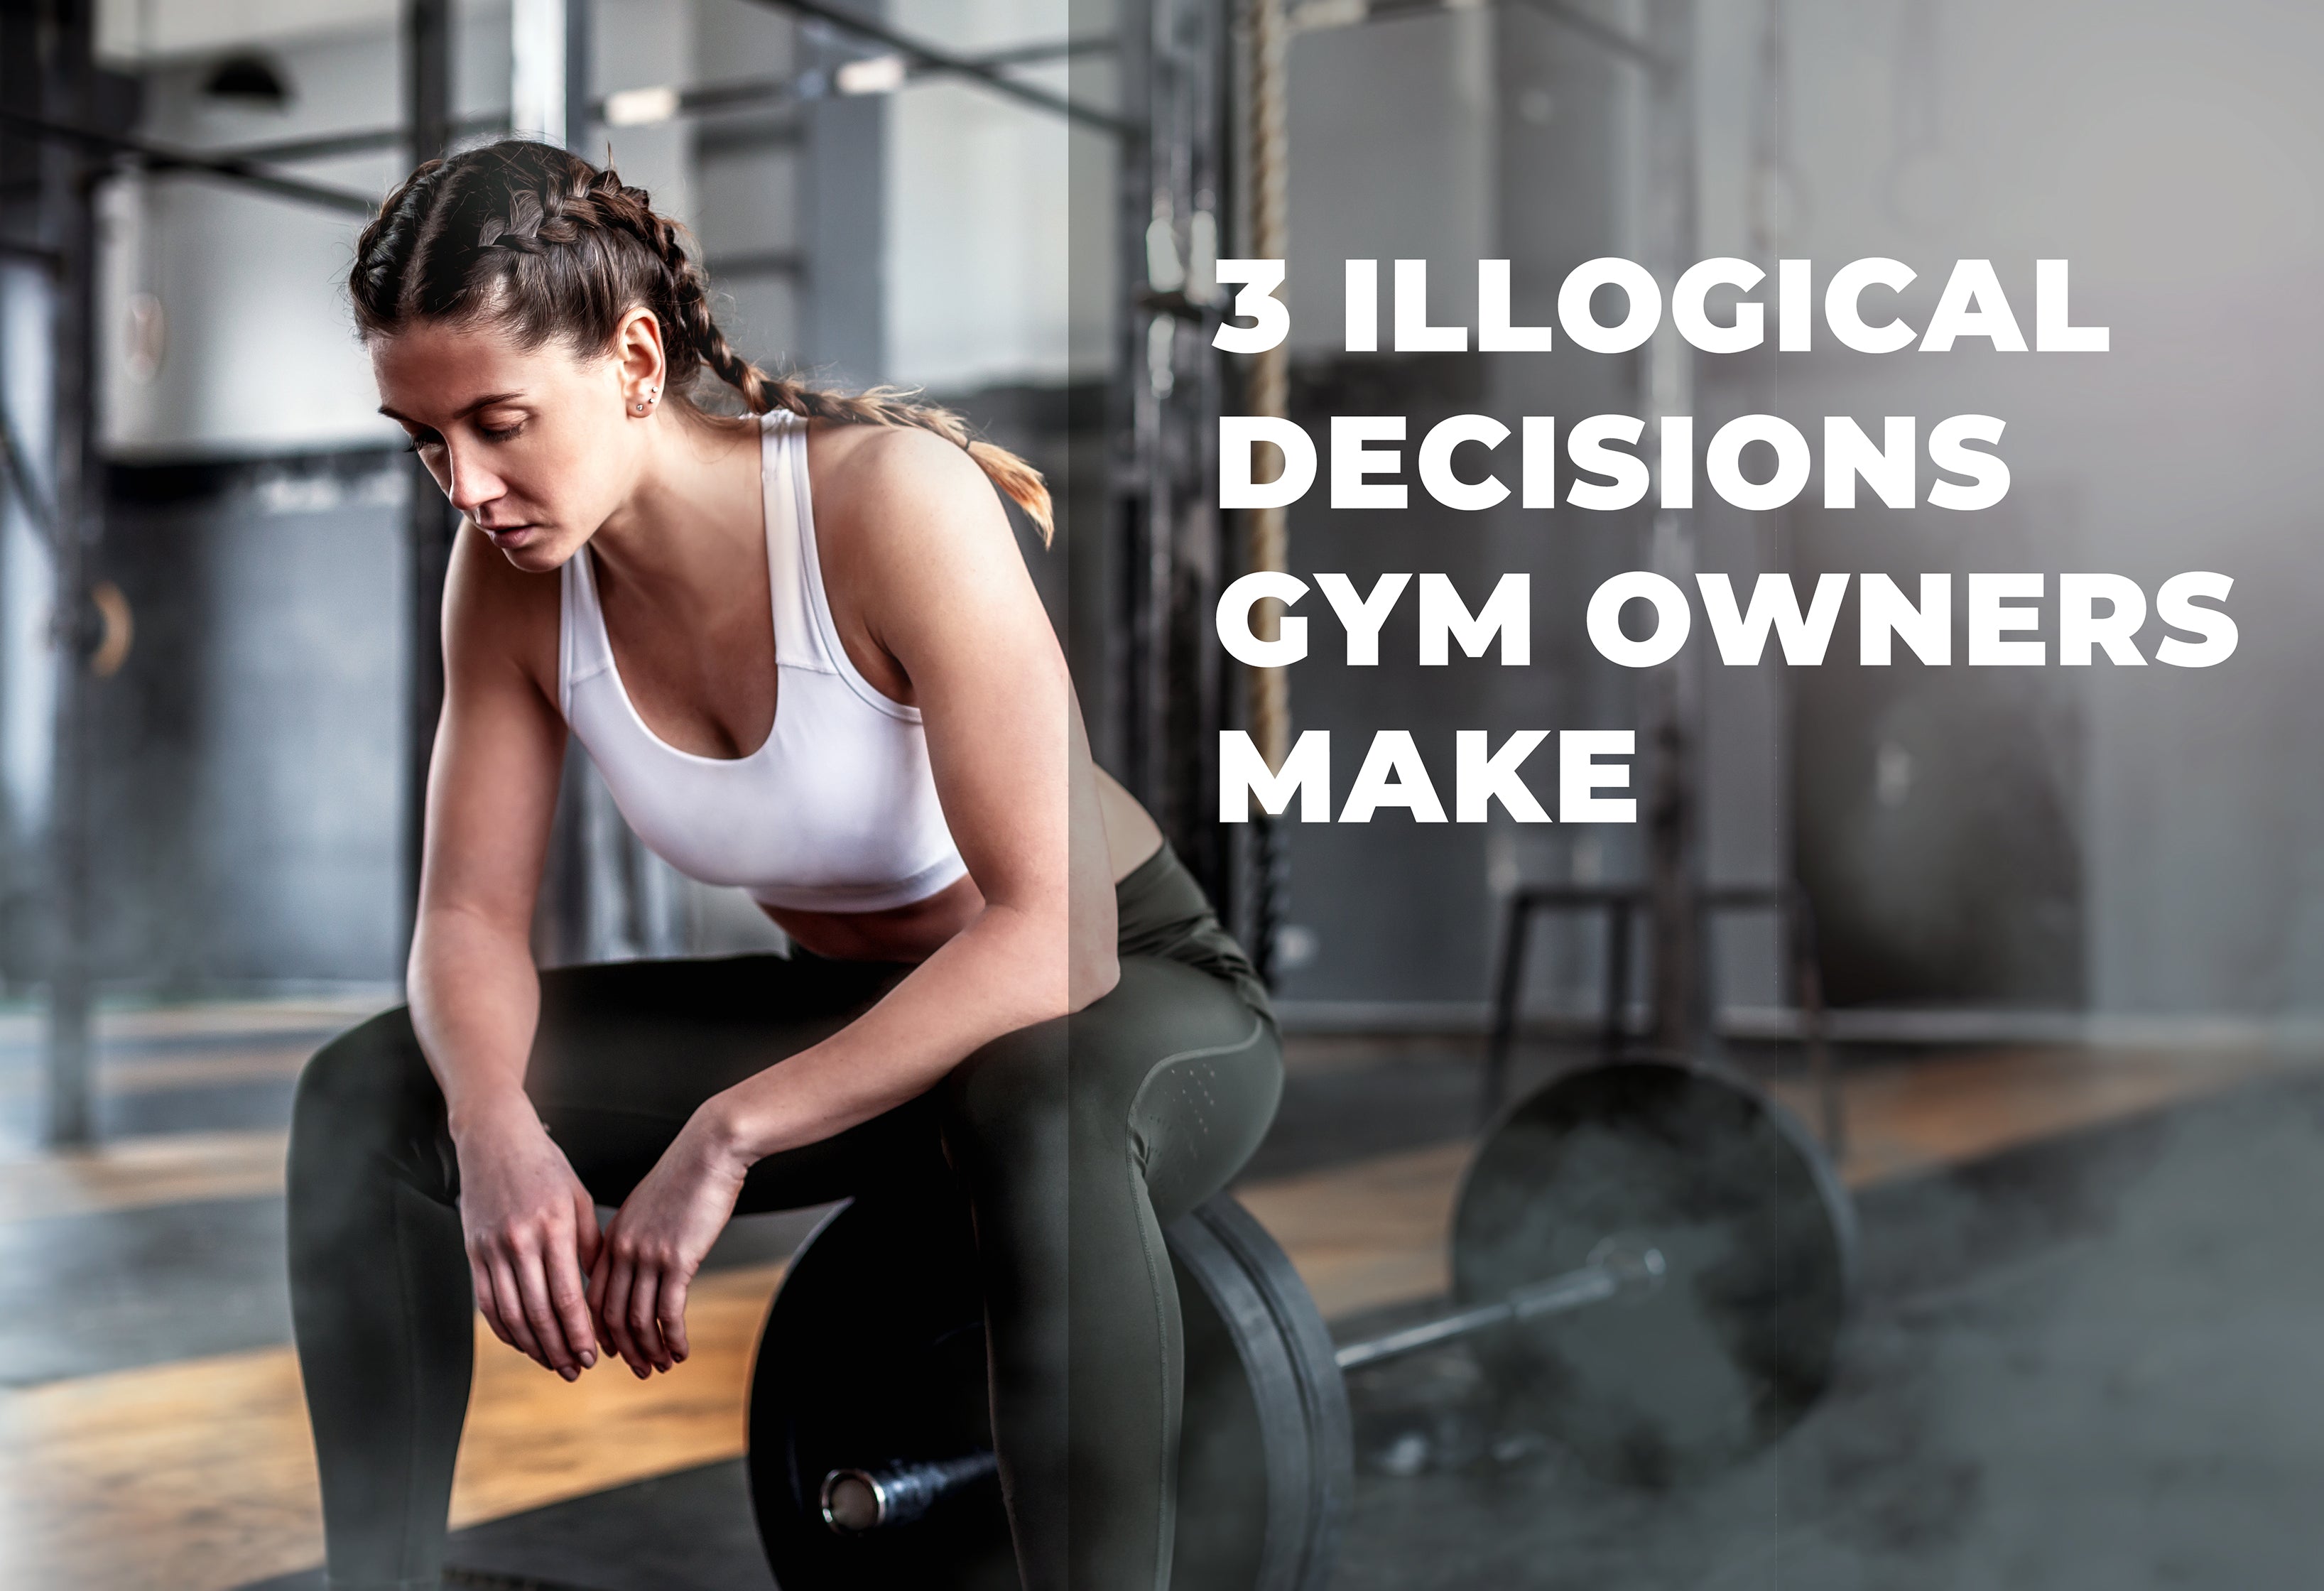 Three Illogical Decisions Gym Owners Make